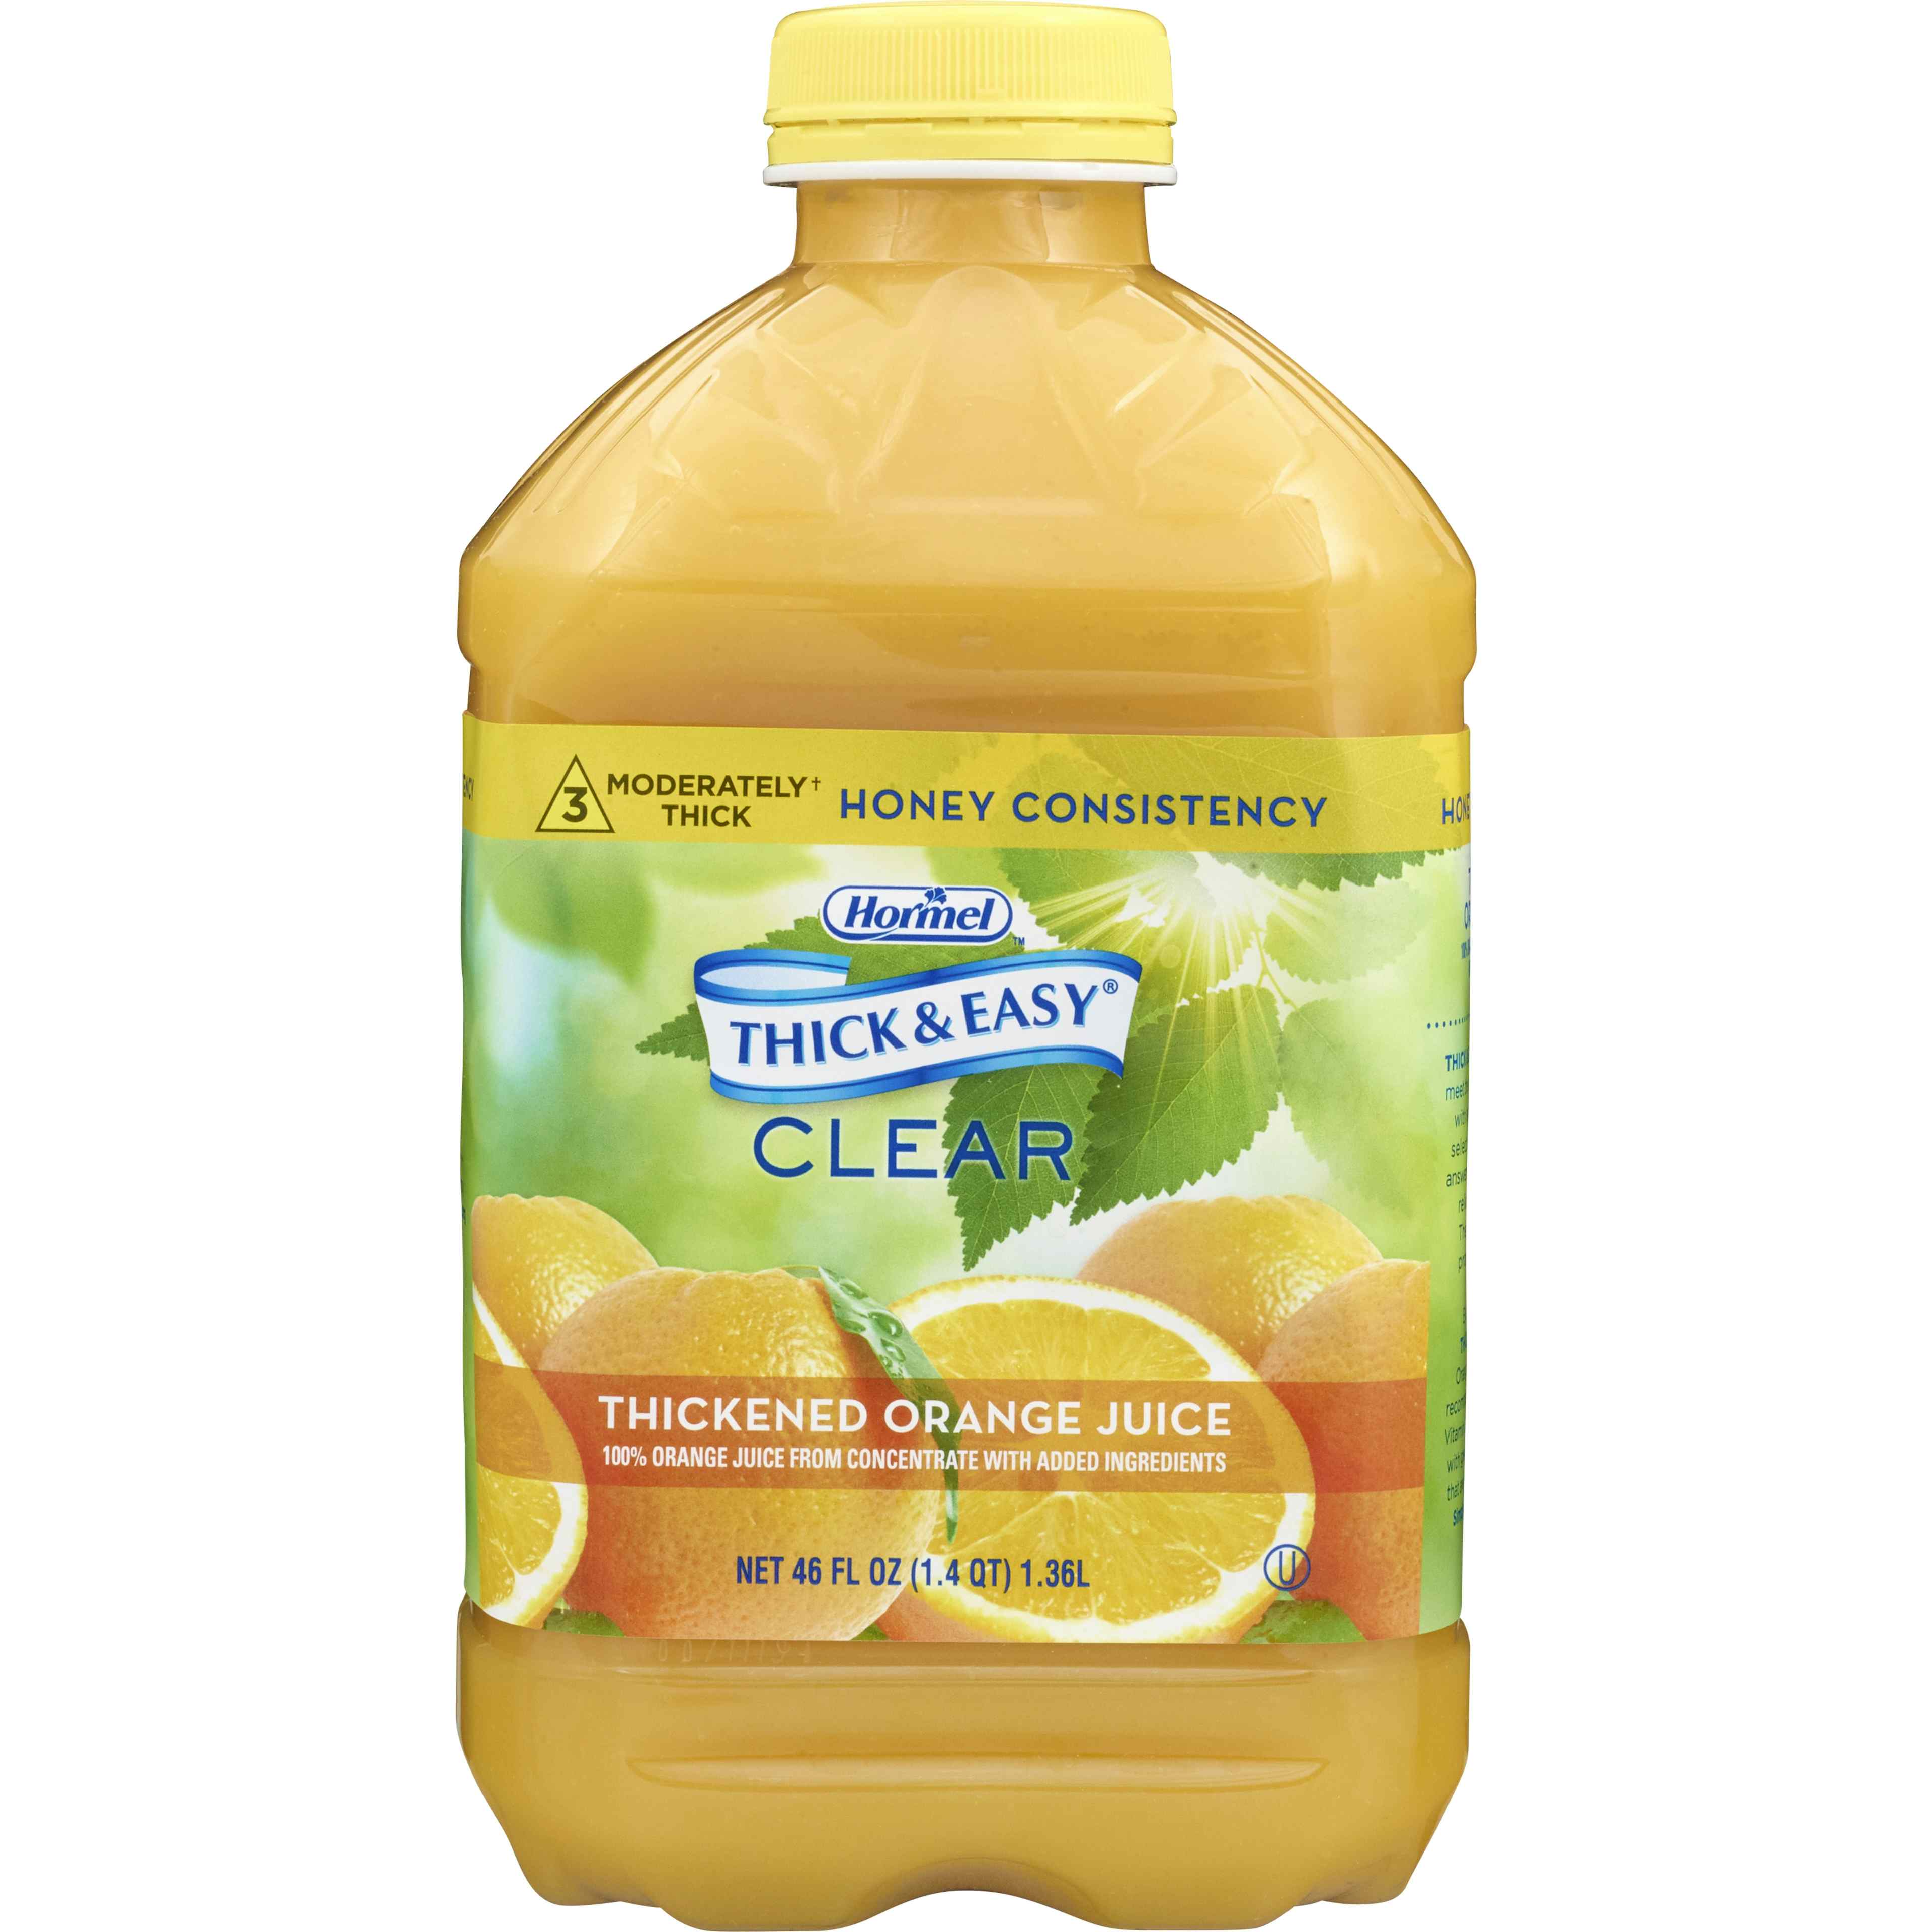 Thick & Easy Clear Honey Consistency Orange Juice Thickened Beverage, 46 oz. Bottle, 40123, Case of 6